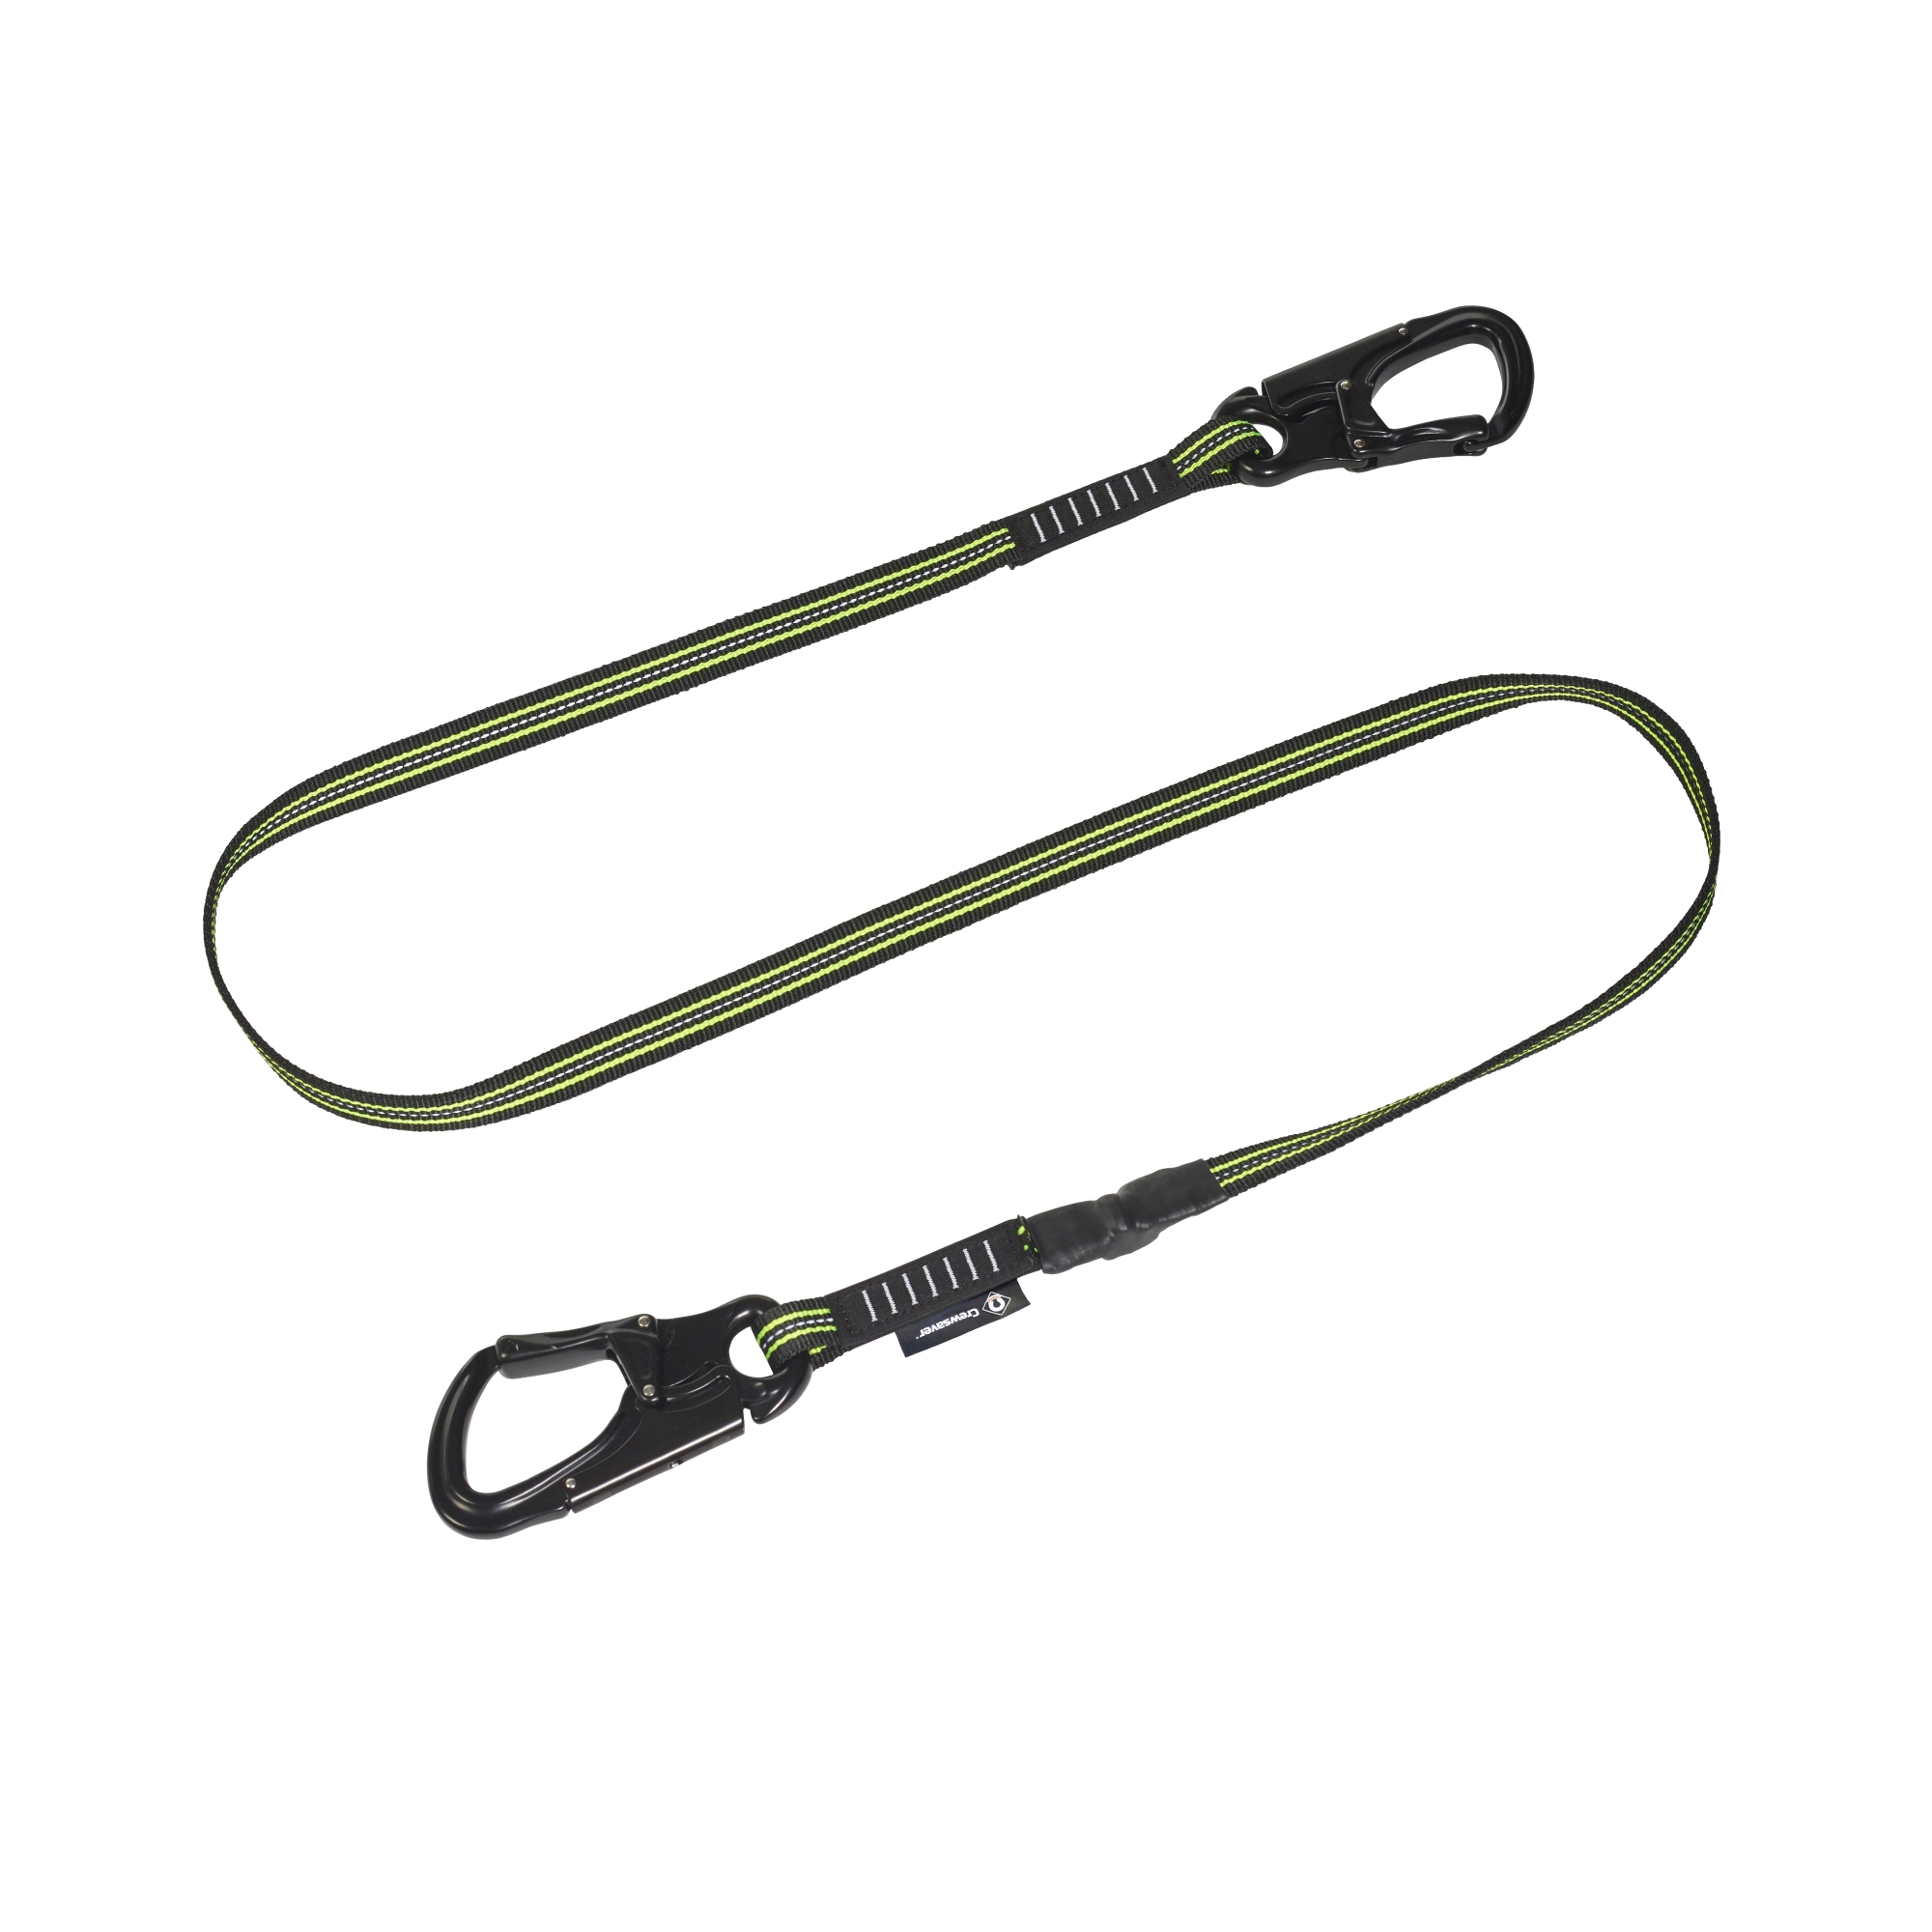 Crewline Pro Double Hook Non-elastic. - with load ind